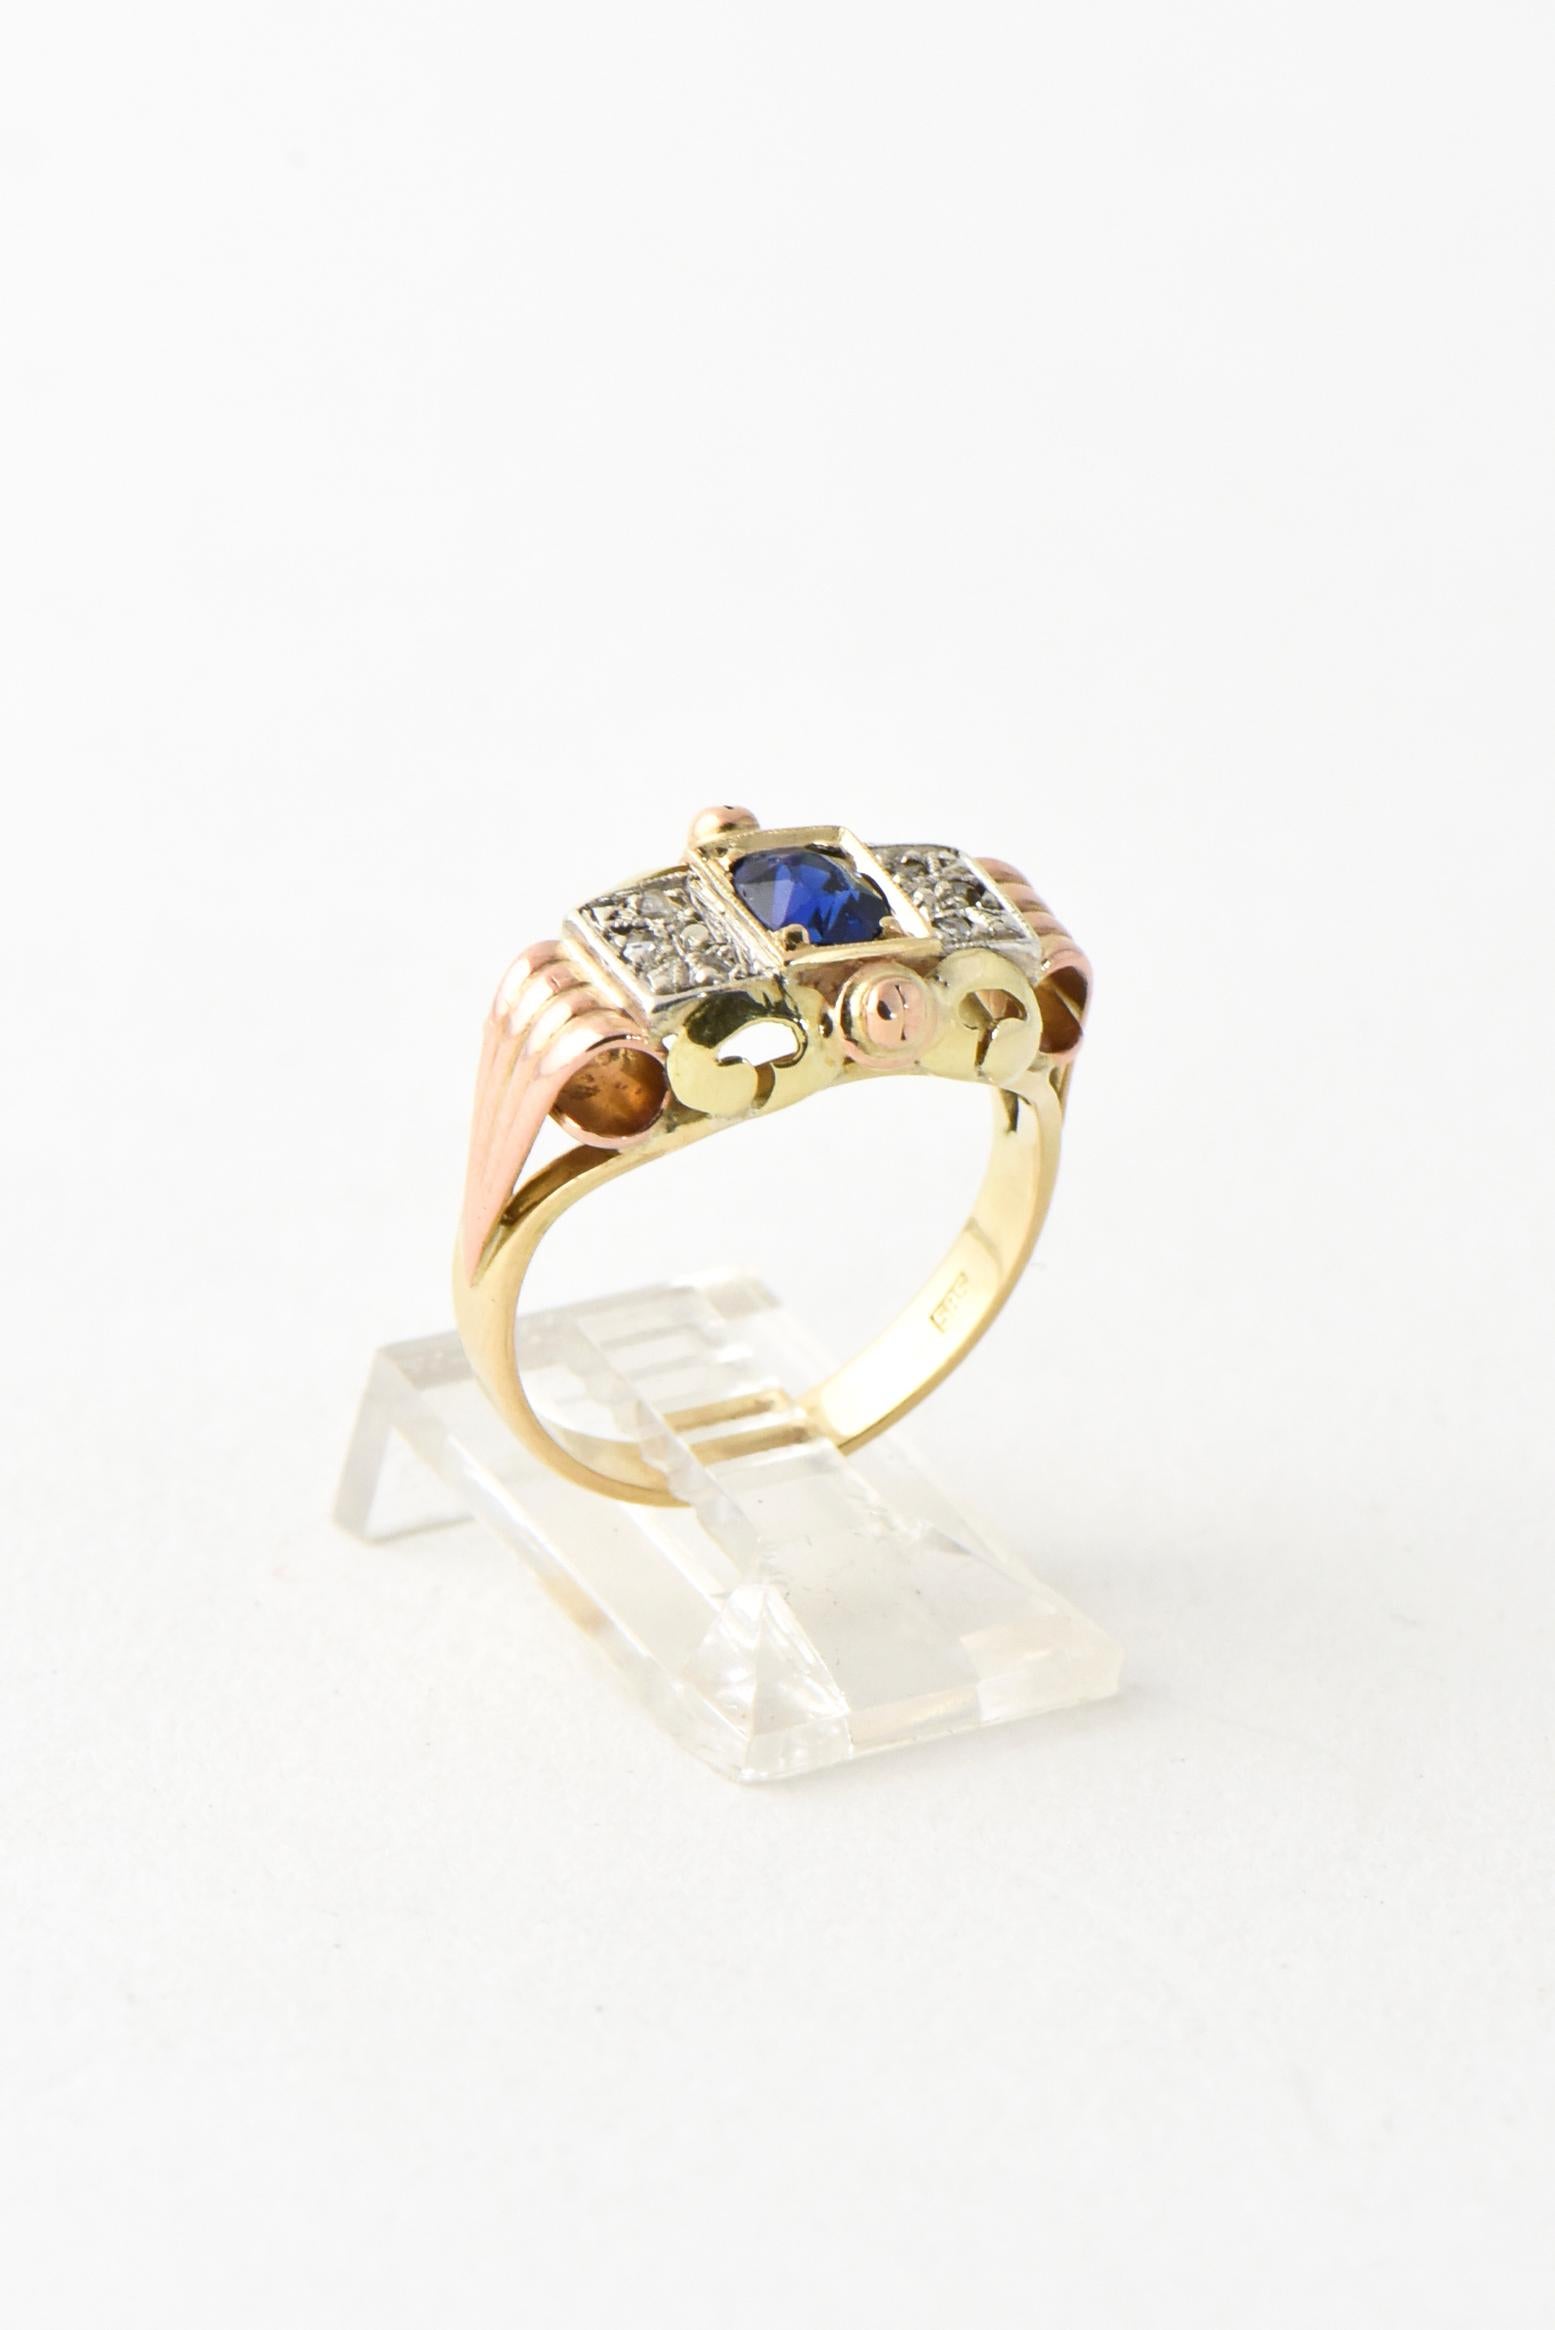 Antique Victorian Sapphire and Diamond Tricolor Yellow Rose White Gold Ring For Sale 2